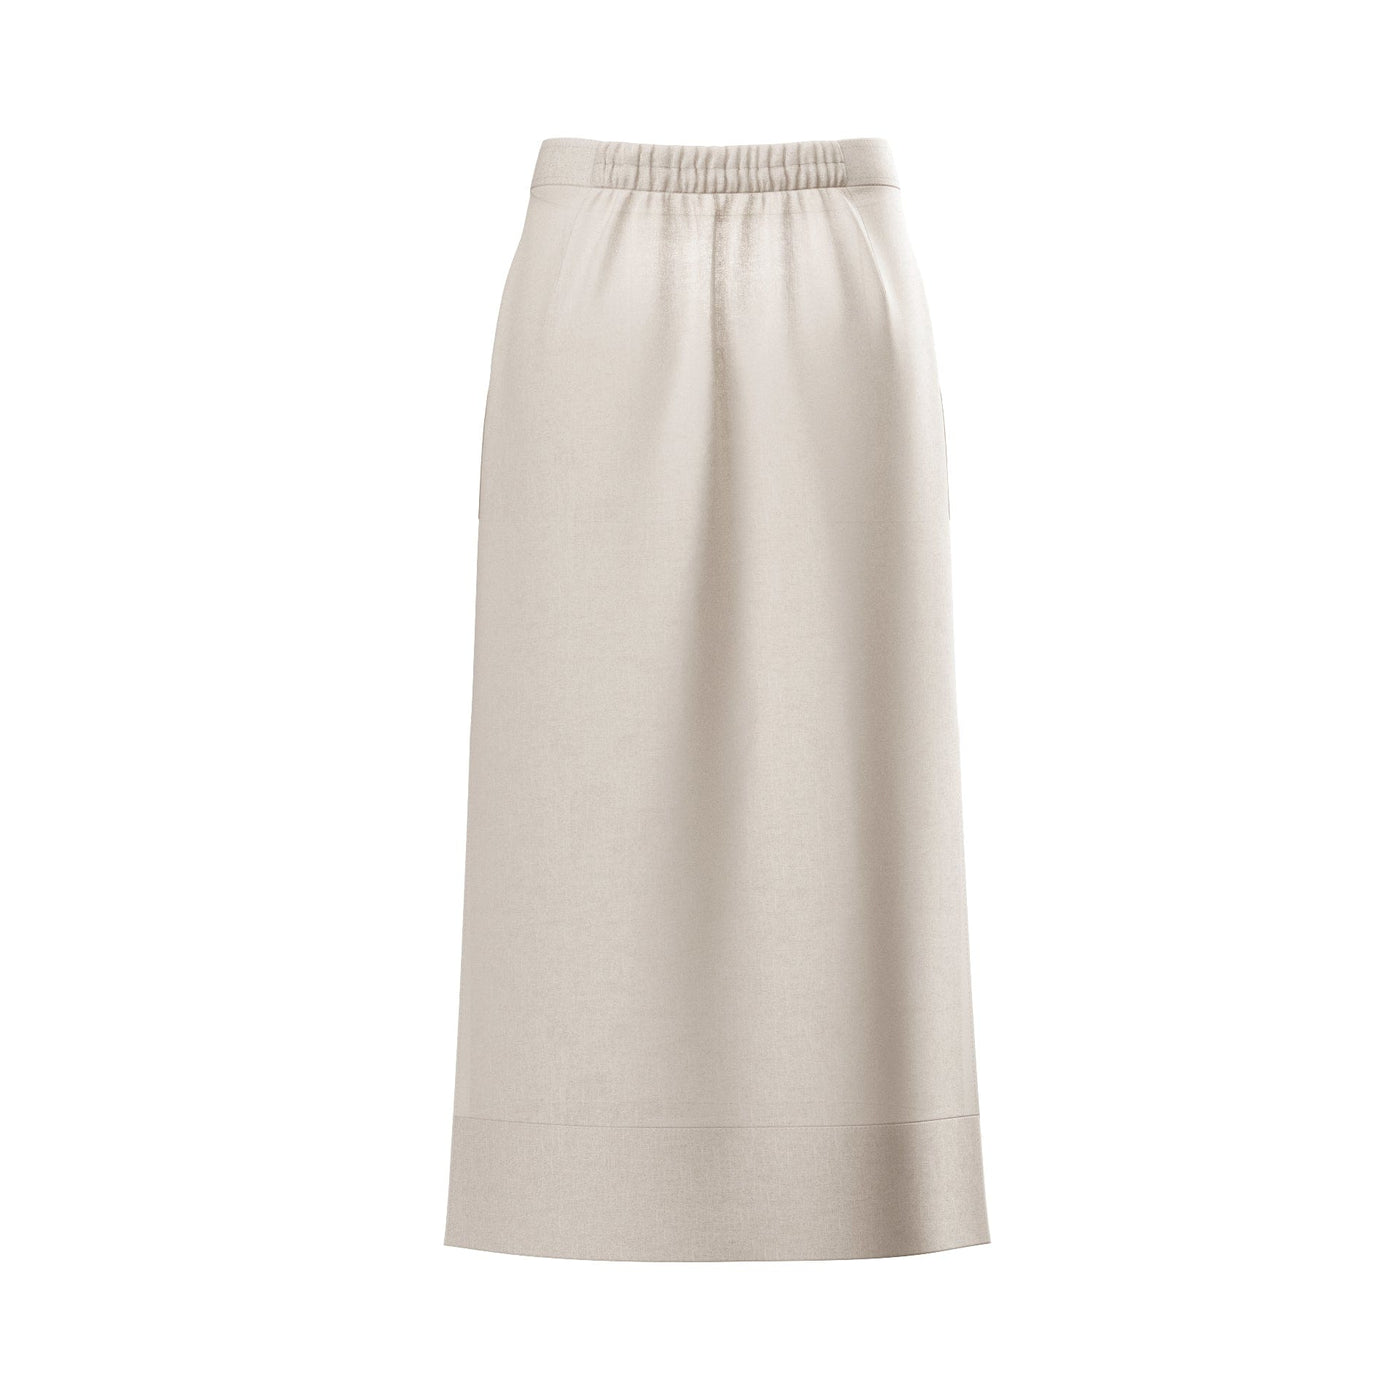 Lilly Pilly Collection Nadi skirt made from 100% Organic linen in Oatmeal, as 3D model showing back view.